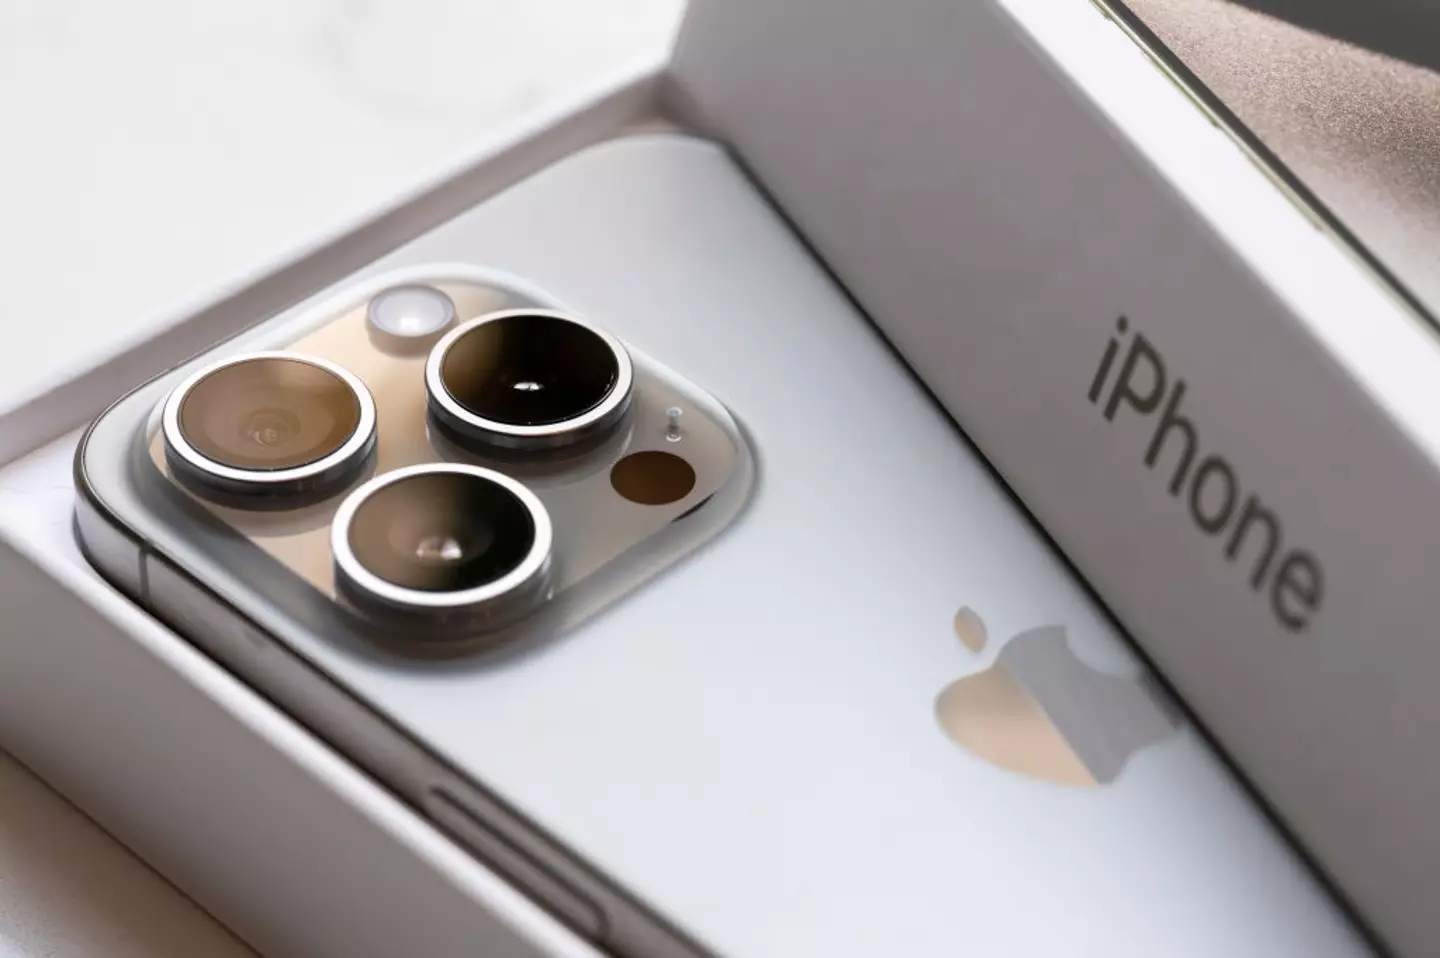 The latest iPhone has three camera lenses bulging from the back (ohn Keeble/Getty Images)